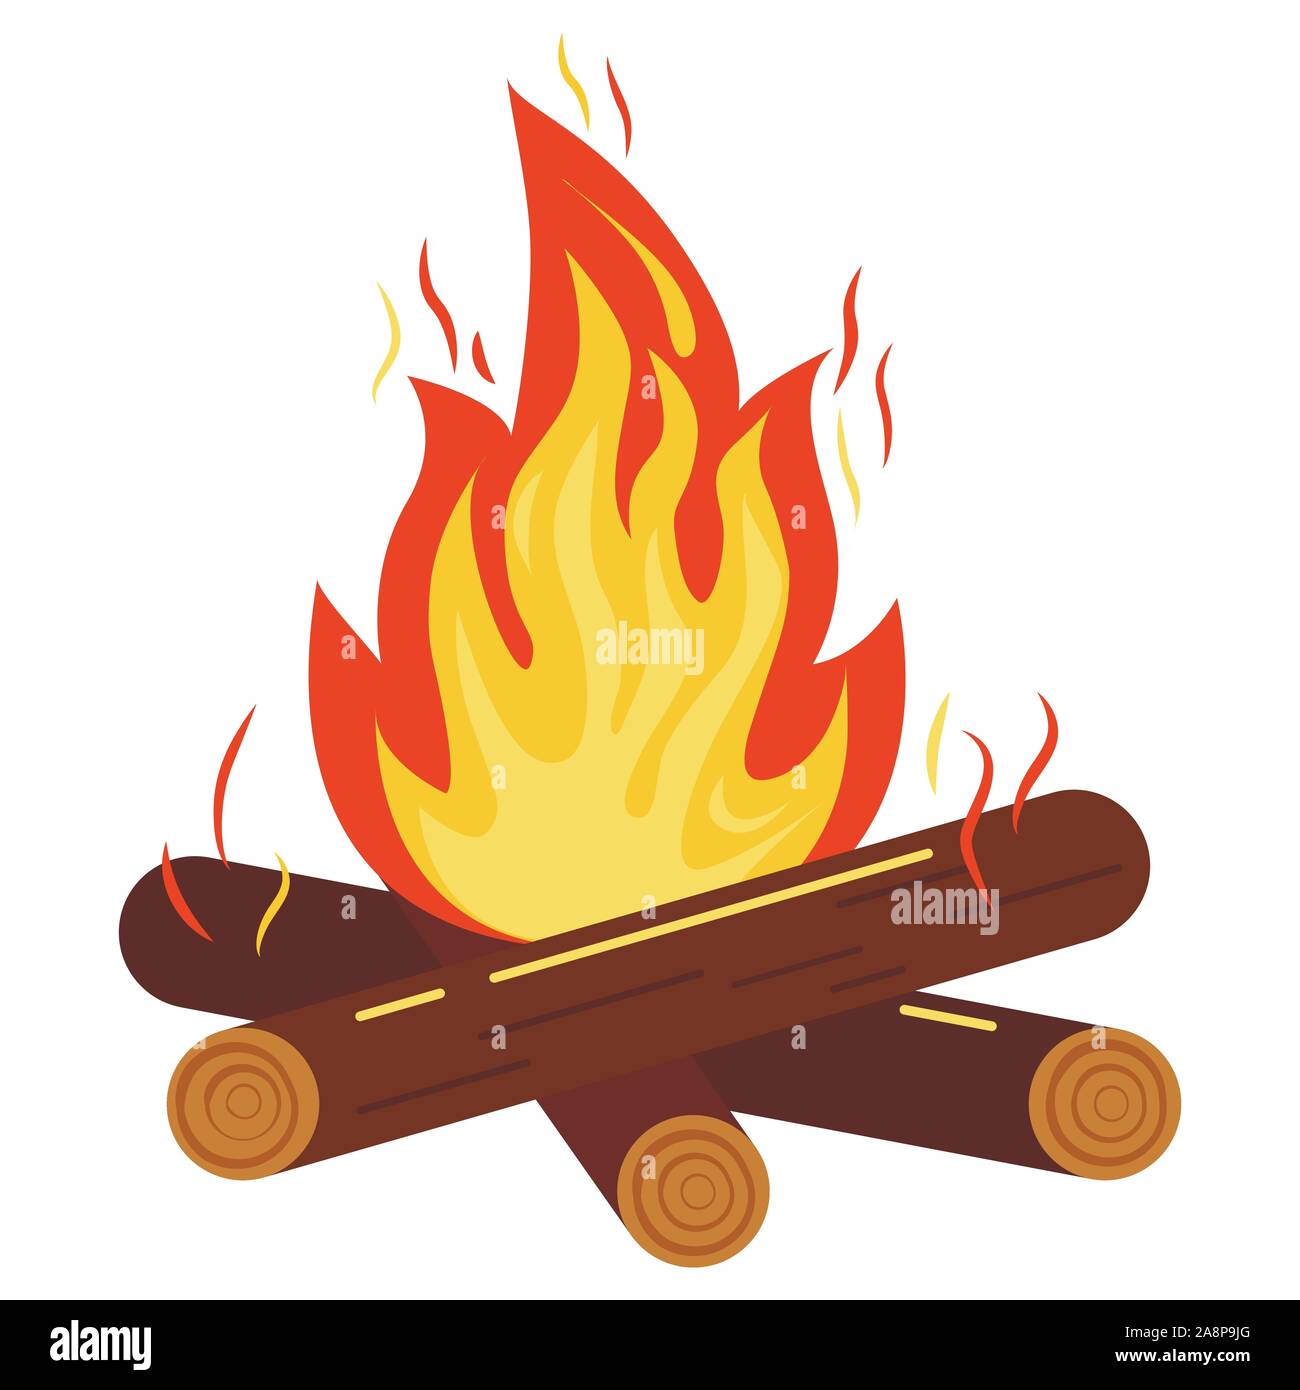 Campfire or bonfire icon vector illustration of burning bonfire with sparks, wood logs isolated on white background. Stock Vector